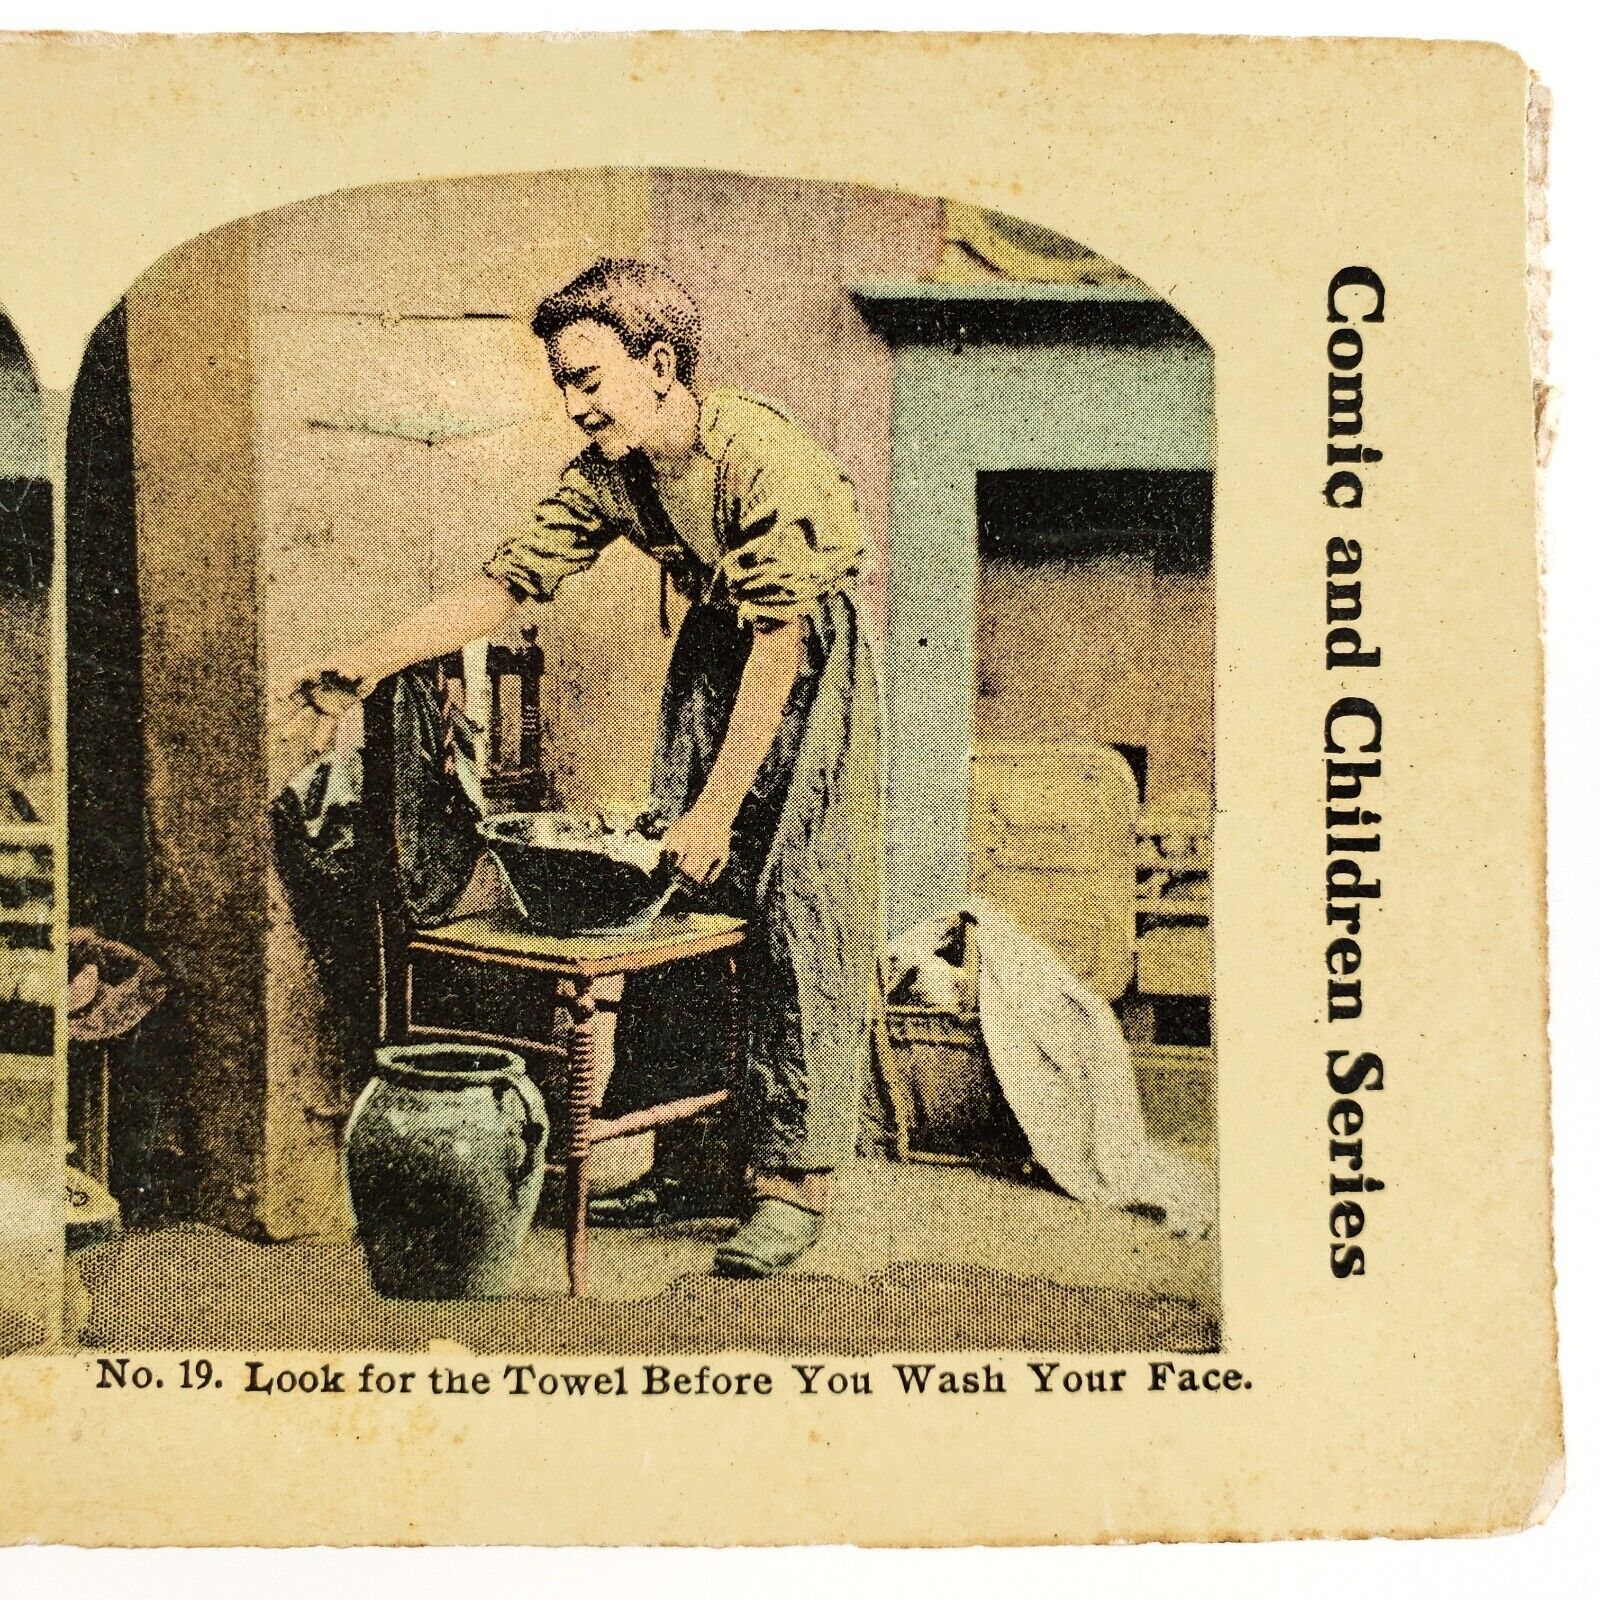 Boy Searching for Towel Stereoview c1915 Washing Up Home Life Antique Card H1320